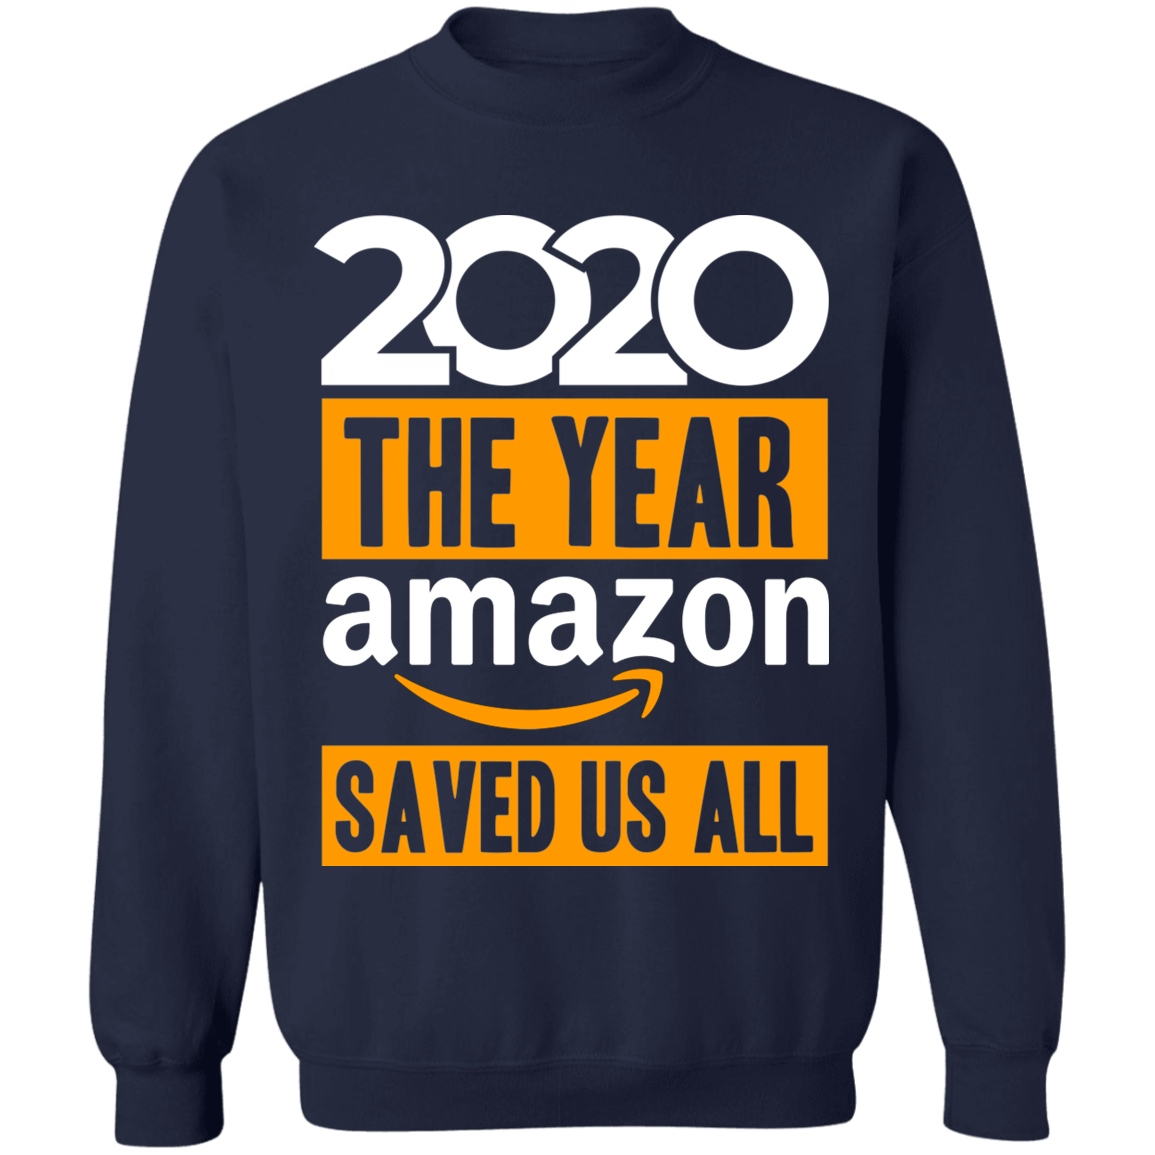 2020 The Year Amazon Saved Us All Apparel